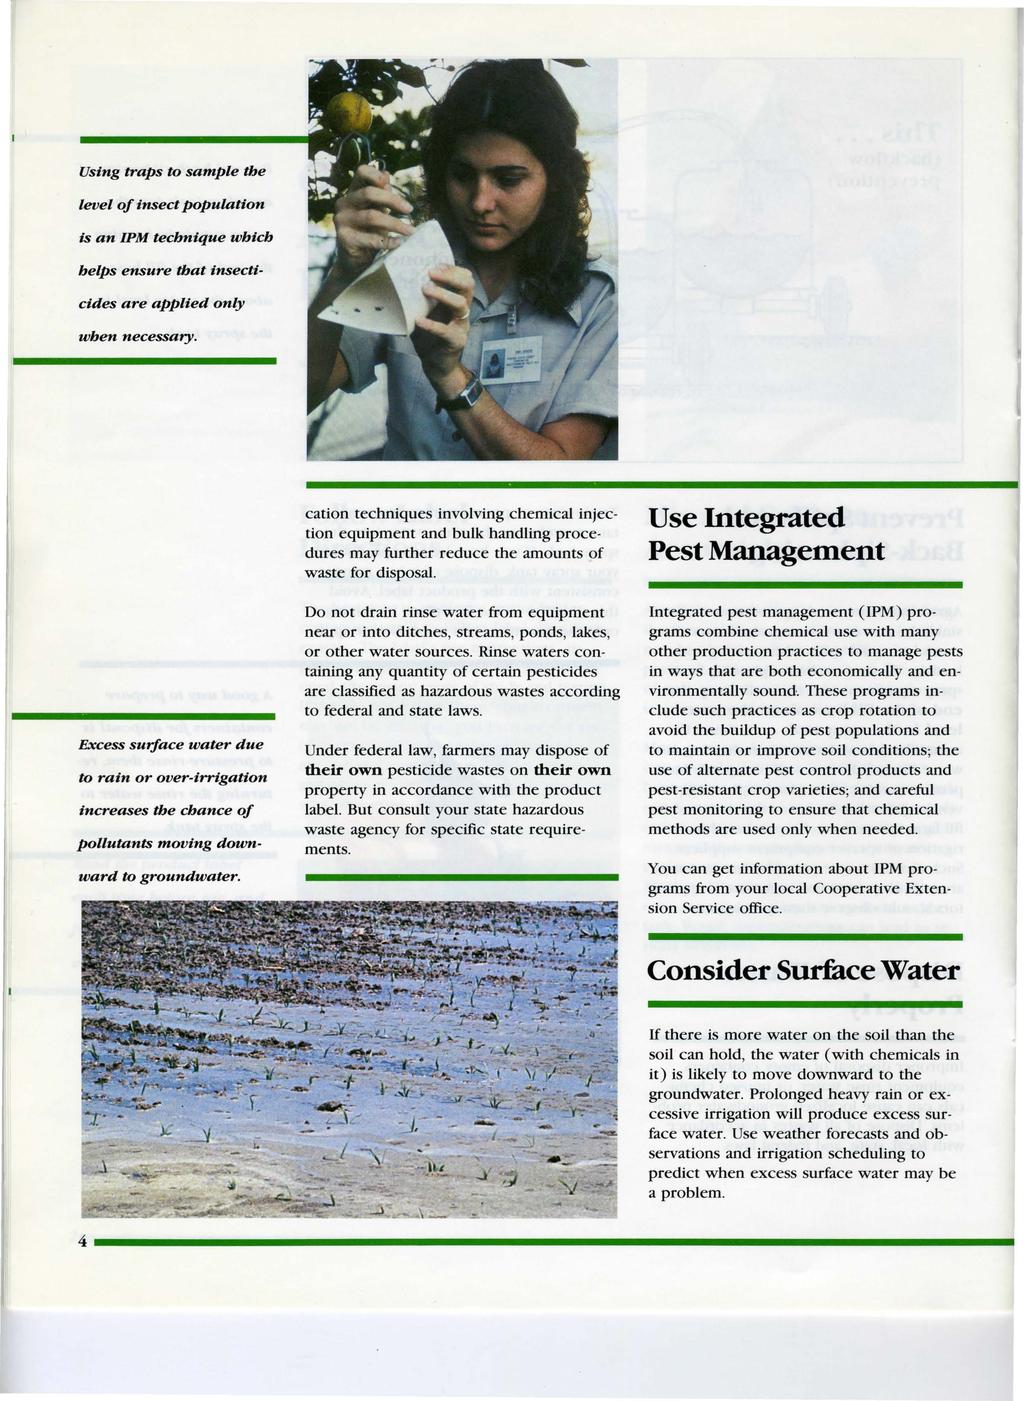 Using traps to sample the level of insect population is an IPM technique which helps ensure that insecticides are applied only when necessary.